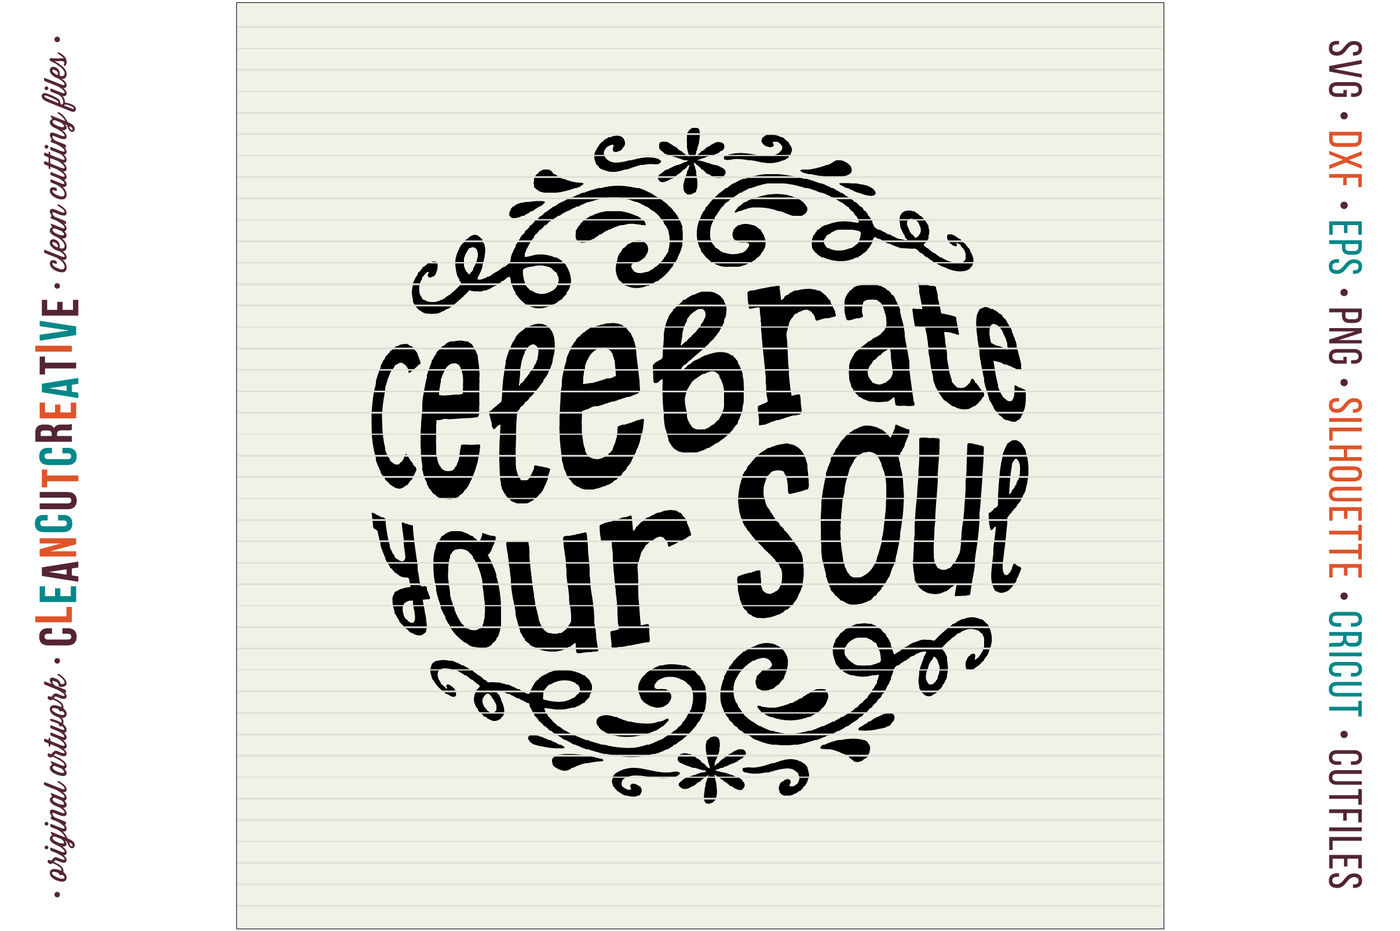 Download CELEBRATE YOUR SOUL! - Happy Spiritual Inspiring Quote ...